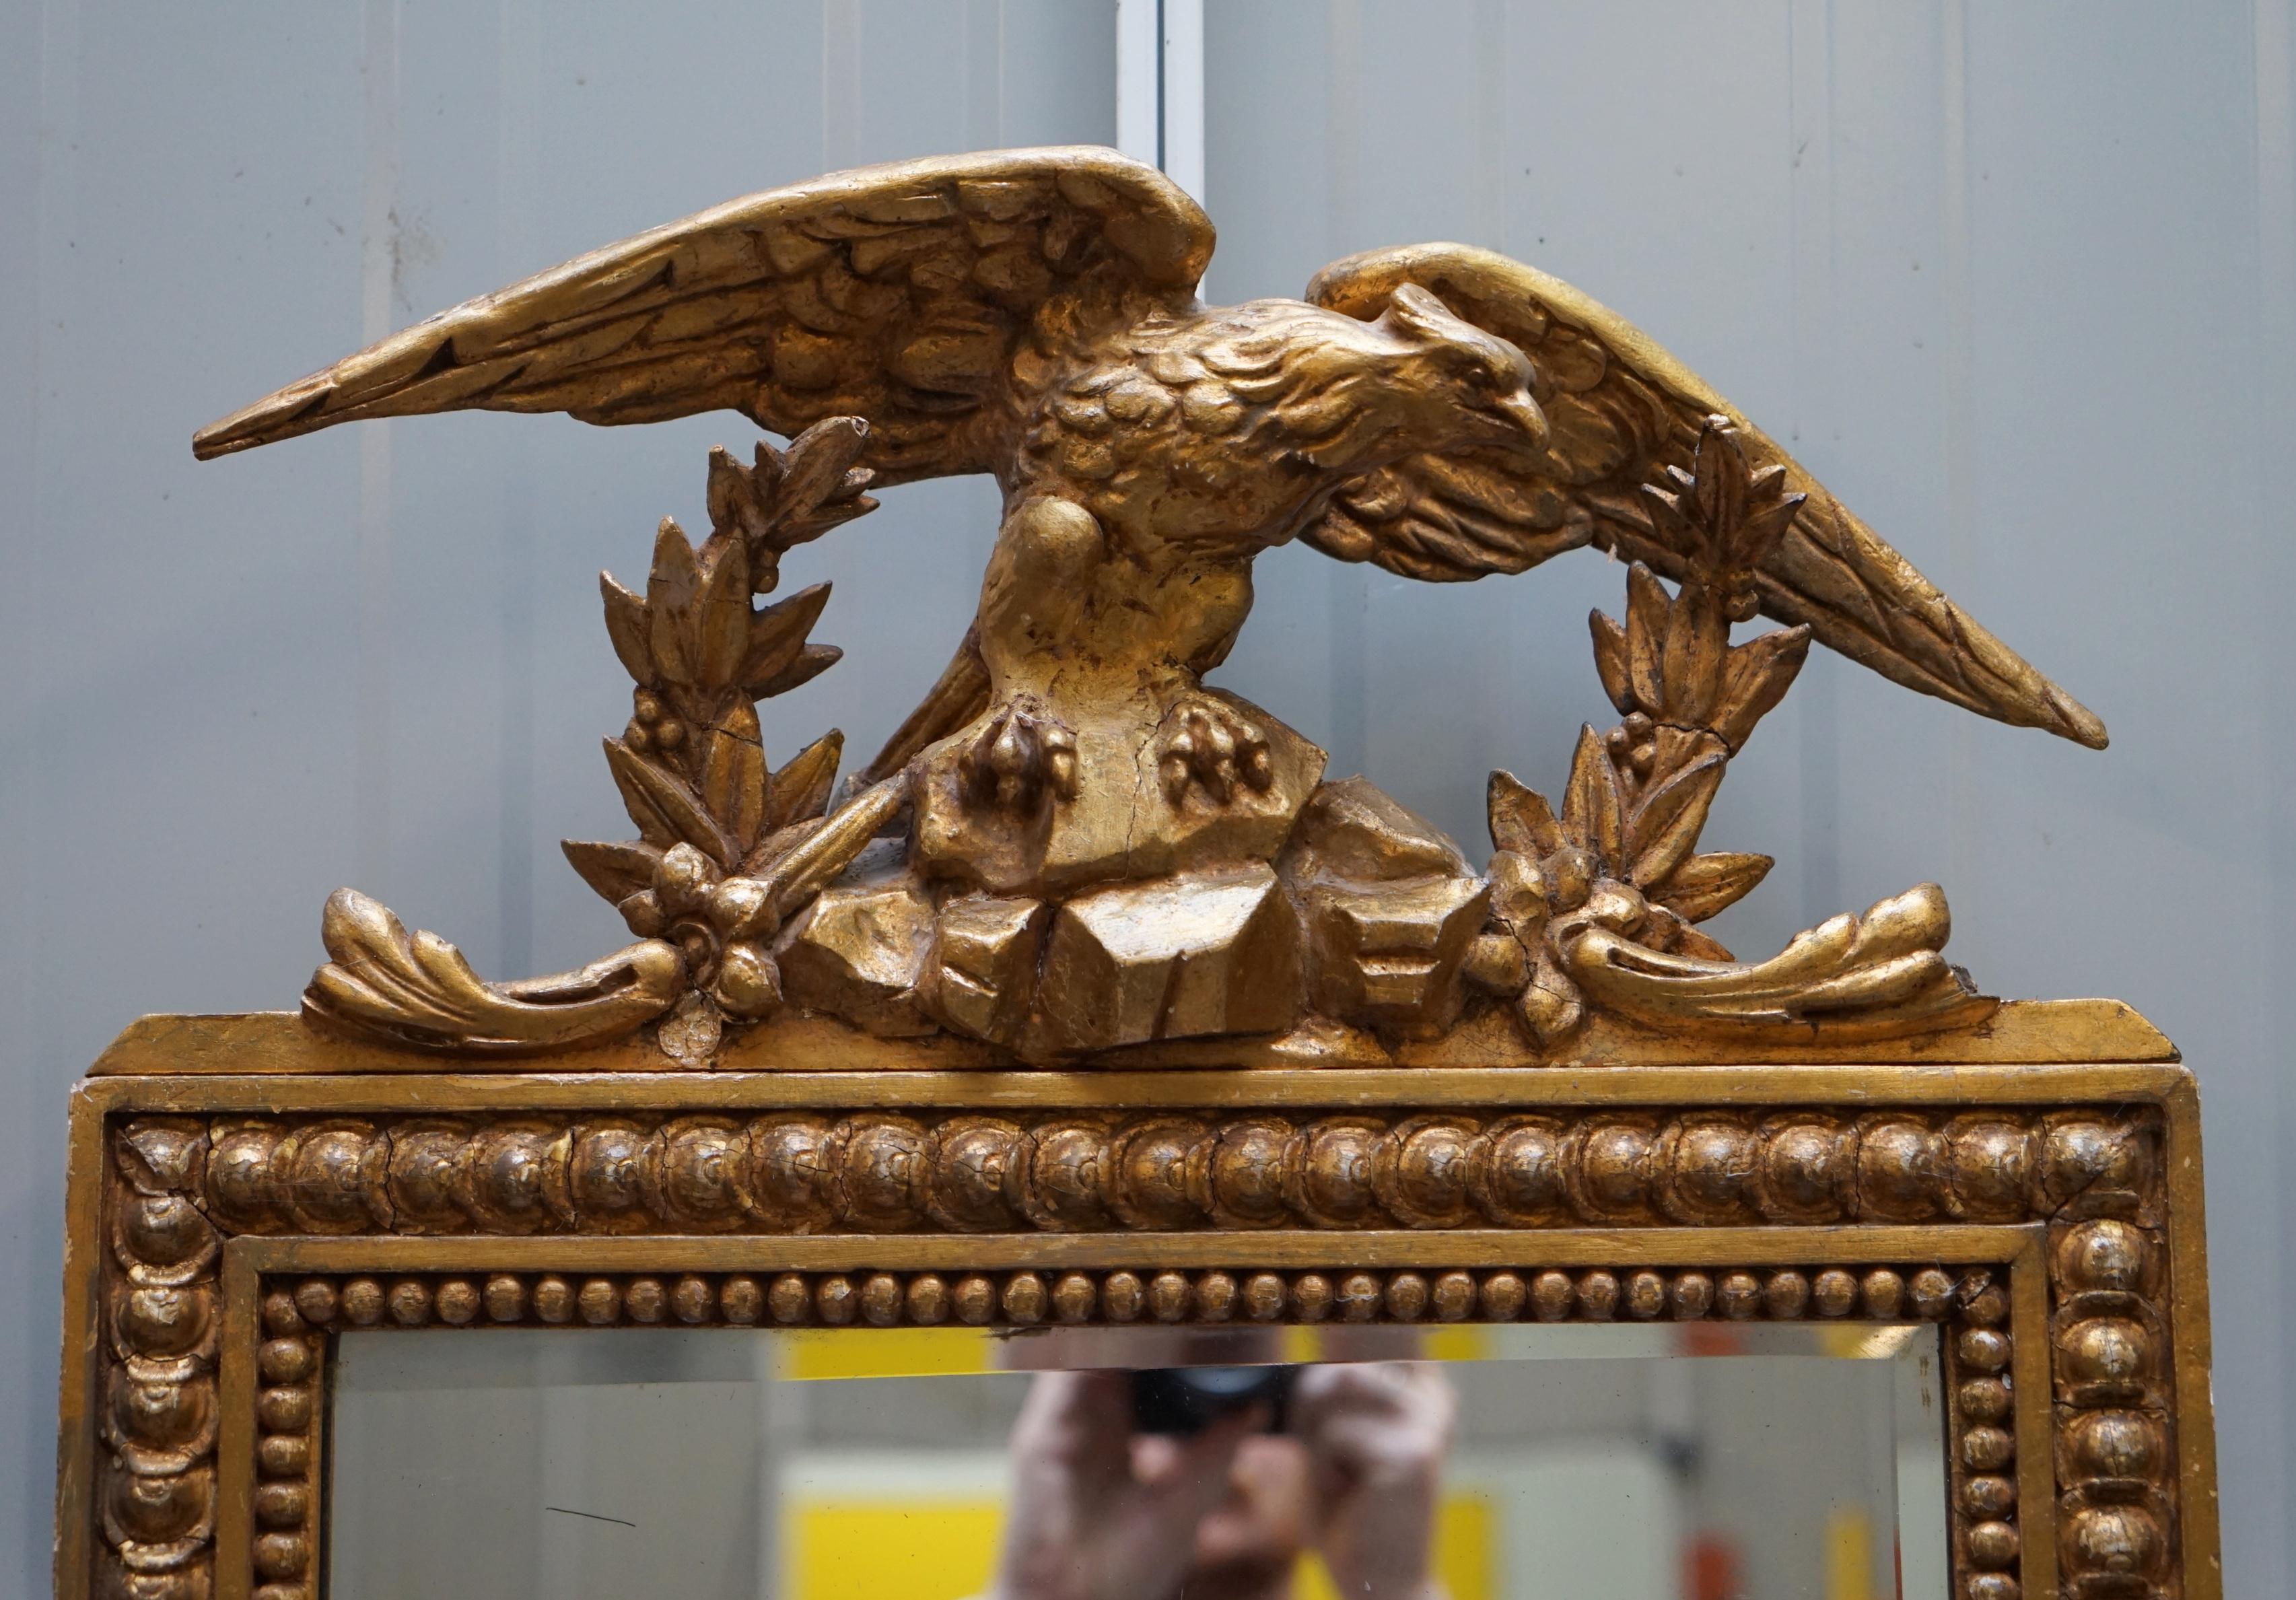 We are delighted to offer this absolutely exquisite original Regency circa 1810-1820 hand carved gilded gesso wall mirror with oversized eagle top

This is a very decorative and beautifully carved Regency mirror. I has a gilded gesso finish which